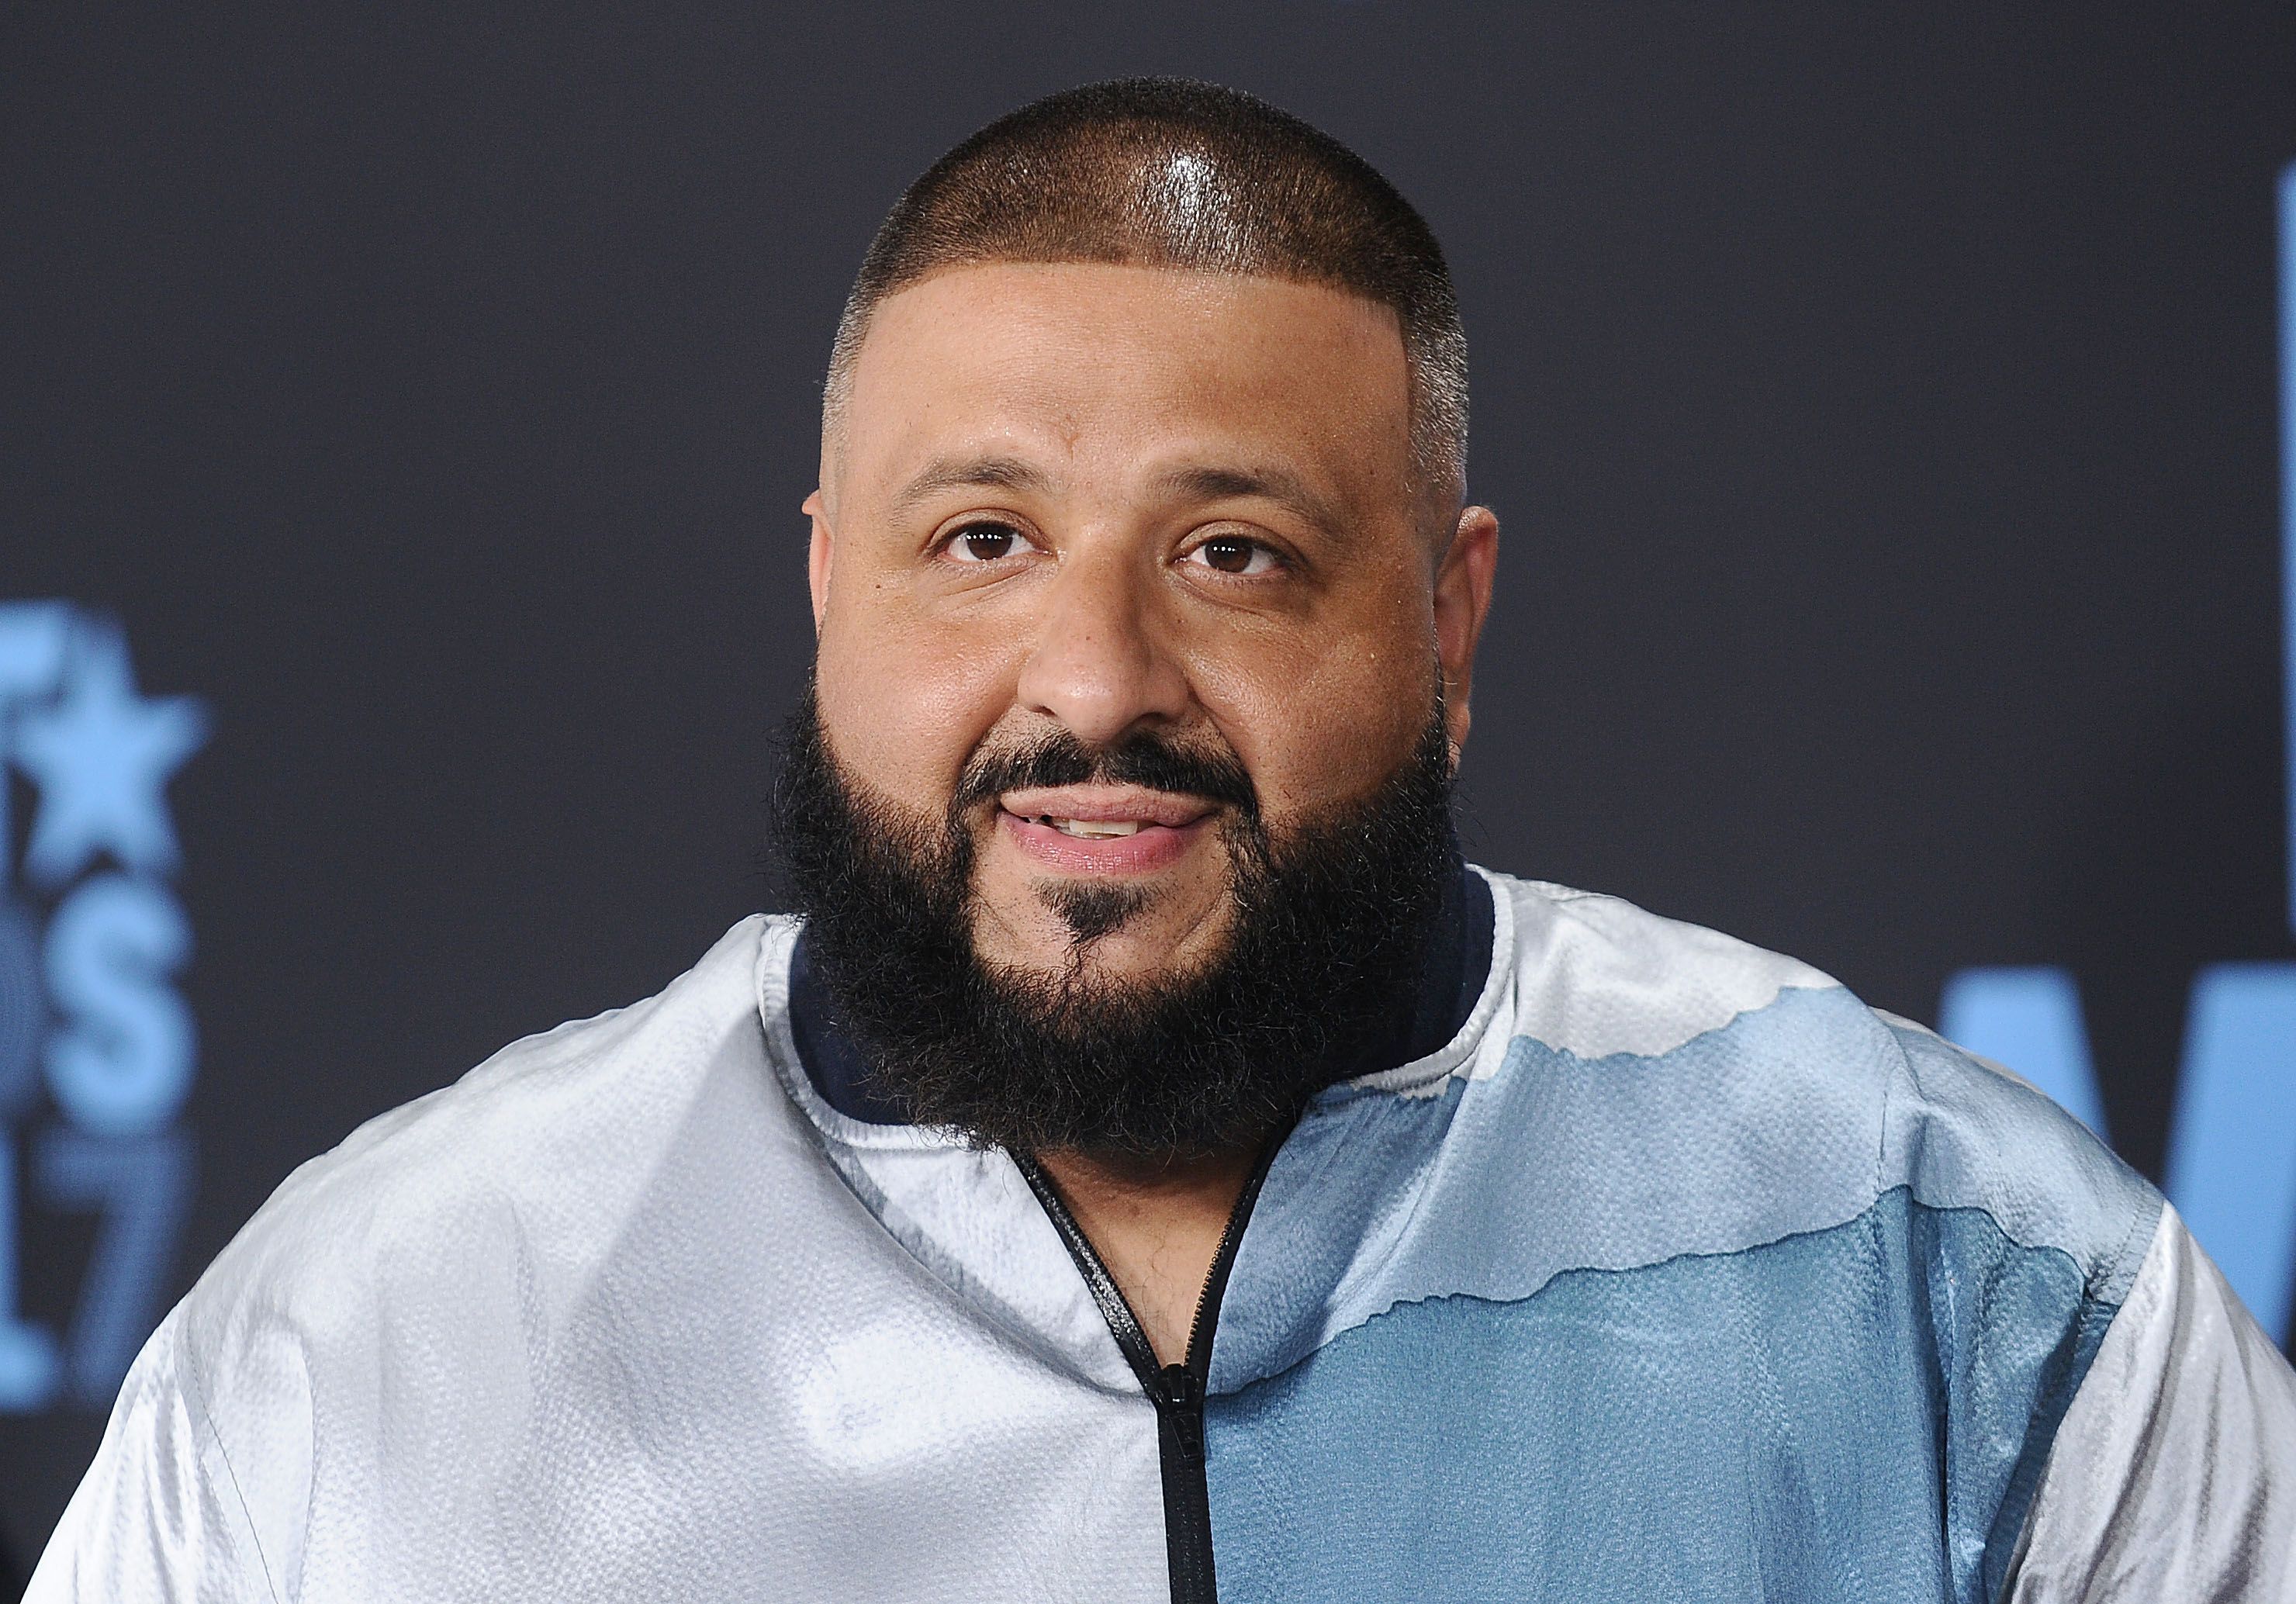 DJ Khaled attends the 2017 BET Awards at Microsoft Theater on June 25, 2017 | Photo: Getty Images.